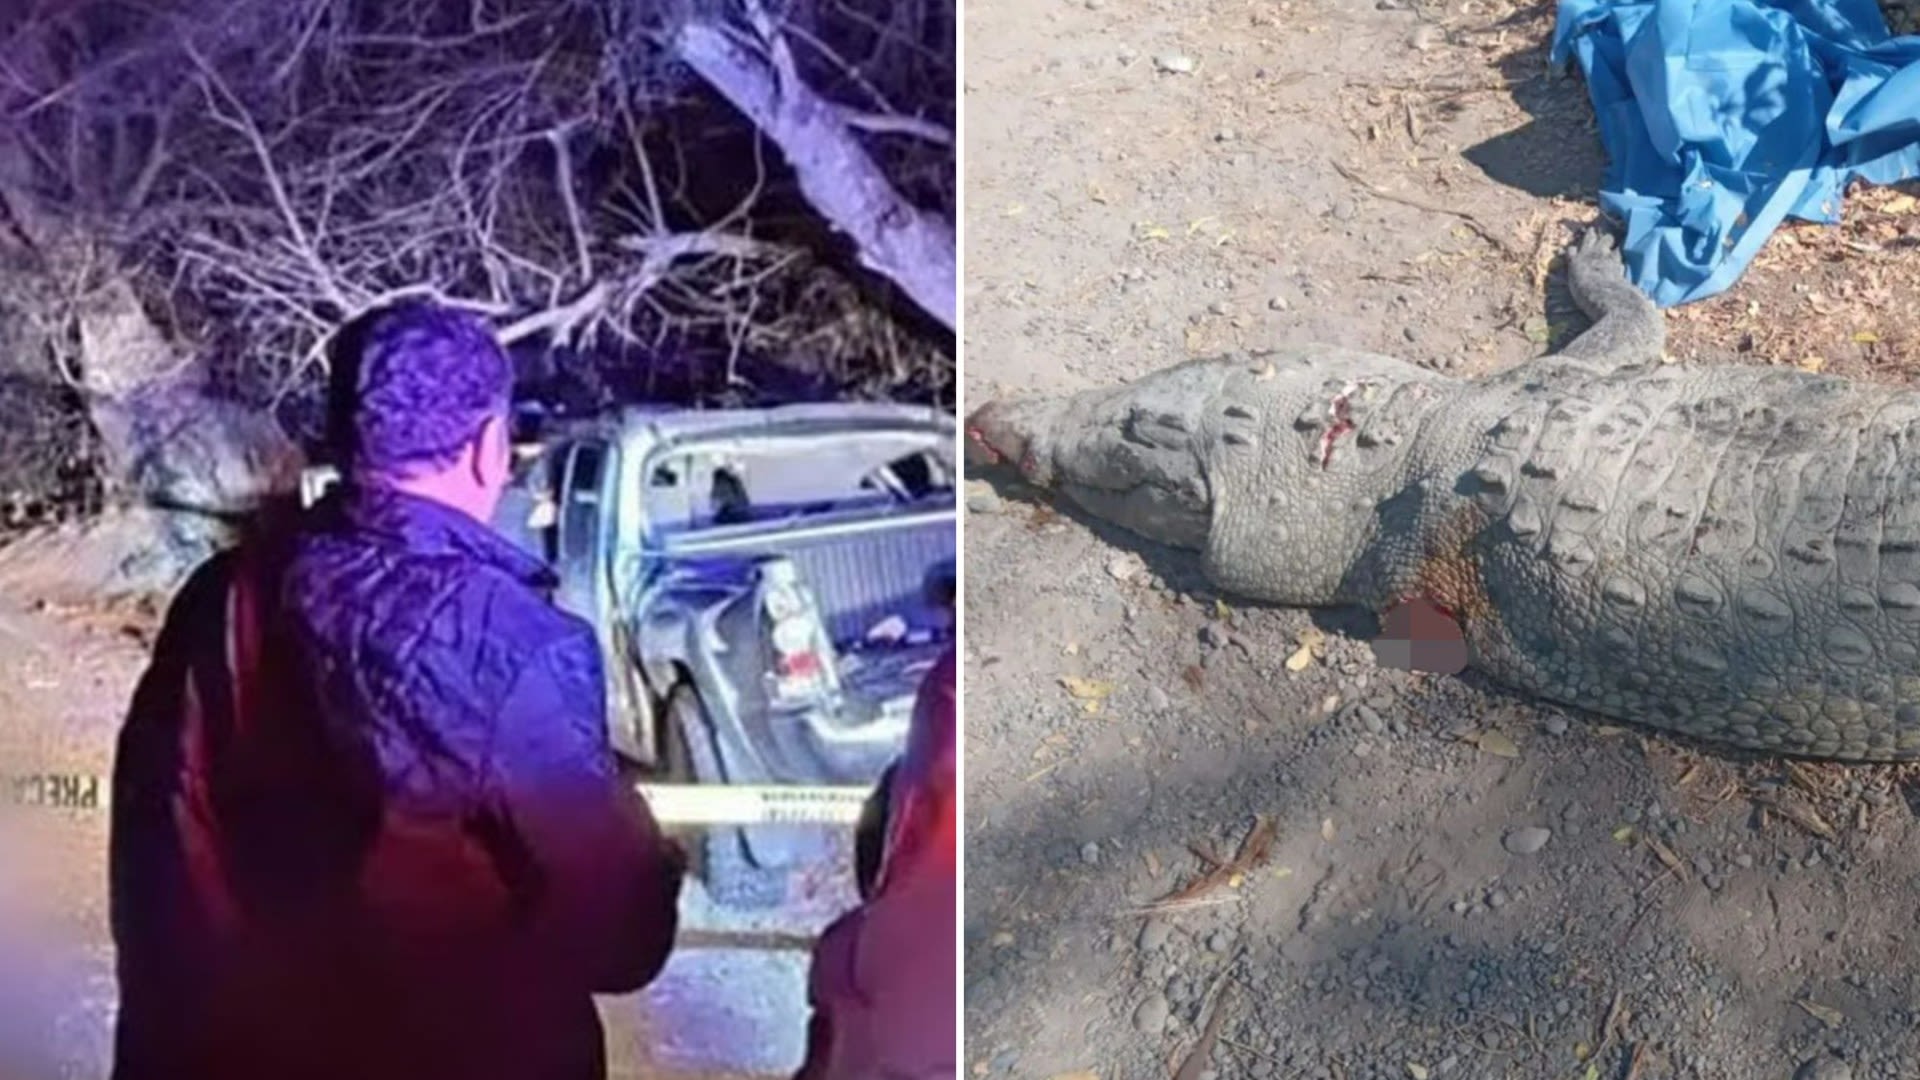 3 killed after crashing into 7ft crocodile and veering into tree in horror smash